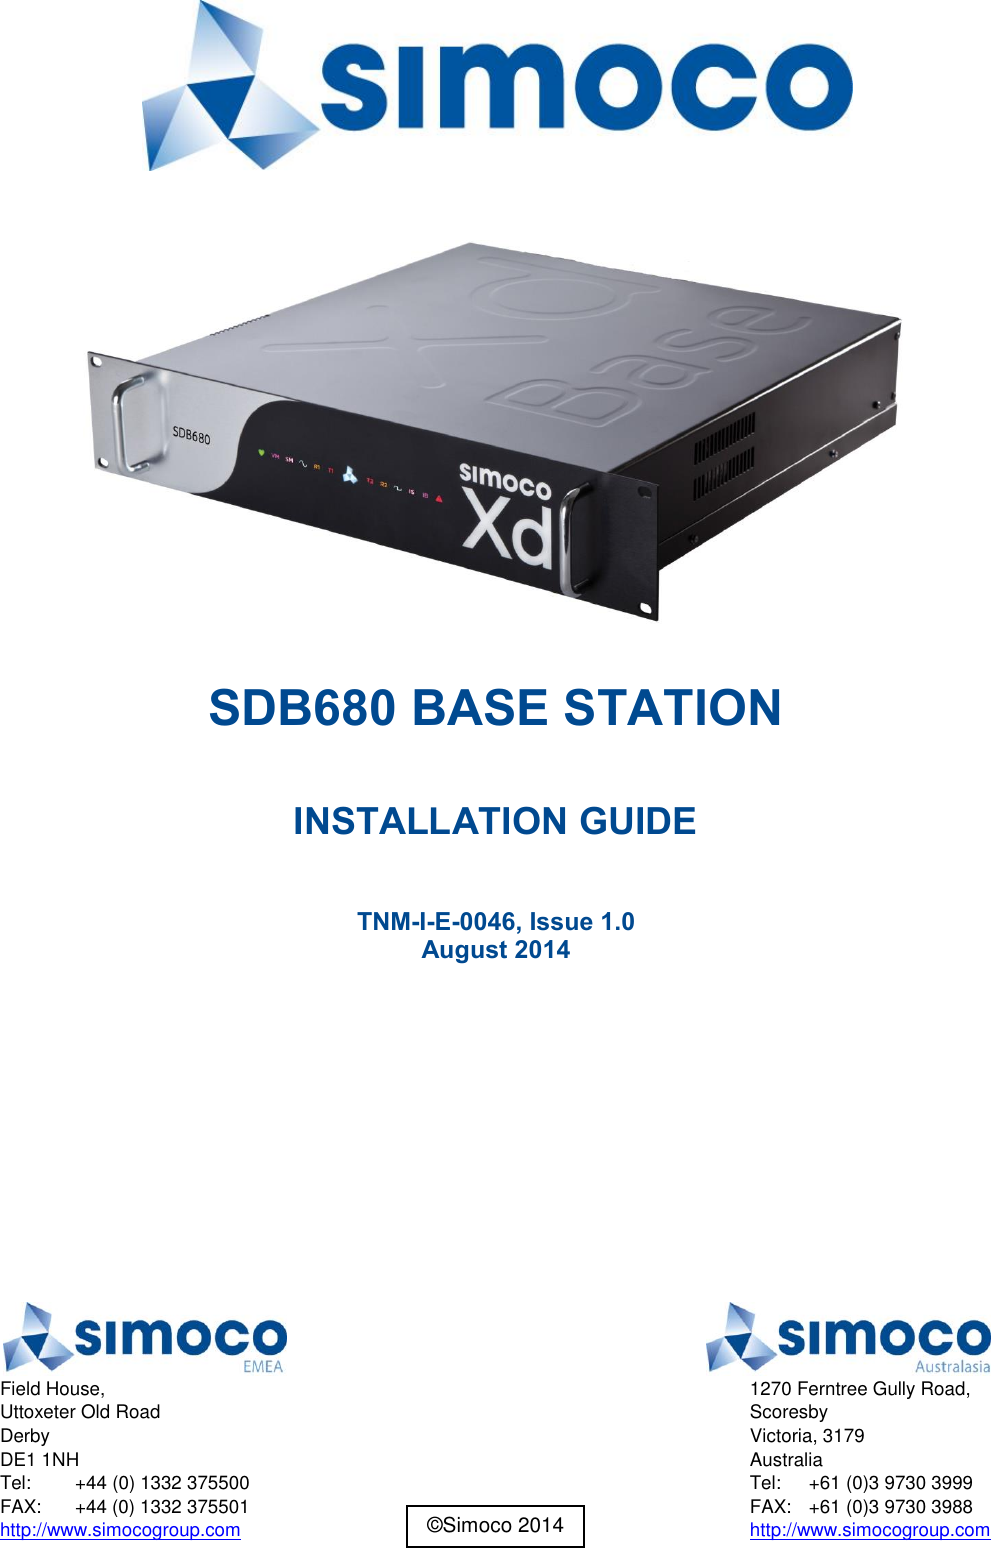     SDB680 BASE STATION  INSTALLATION GUIDE  TNM-I-E-0046, Issue 1.0 August 2014     Field House, Uttoxeter Old Road Derby DE1 1NH Tel:  +44 (0) 1332 375500 FAX:  +44 (0) 1332 375501 http://www.simocogroup.com  1270 Ferntree Gully Road, Scoresby Victoria, 3179 Australia Tel:  +61 (0)3 9730 3999 FAX:  +61 (0)3 9730 3988 http://www.simocogroup.com ©Simoco 2014 